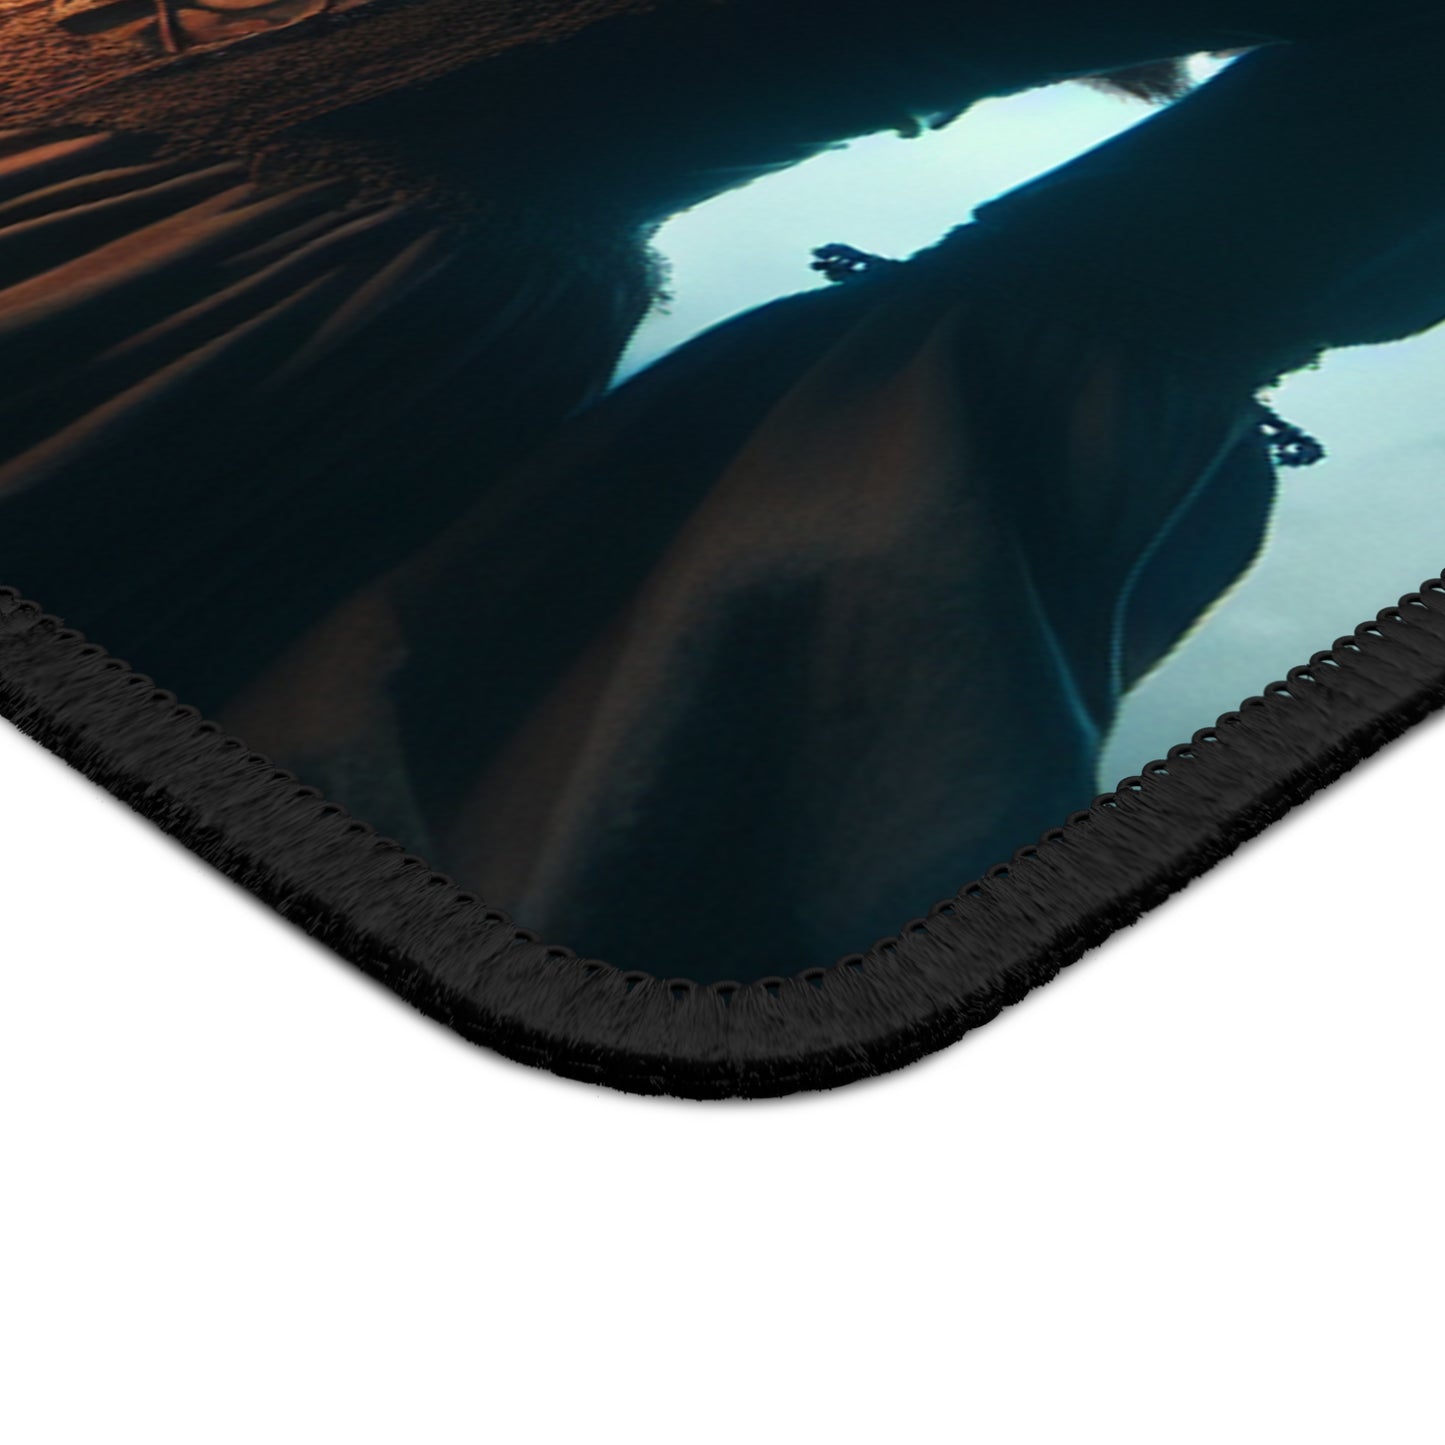 "Ready for Battle in the Twisted Woods" - The Alien Gaming Mouse Pad Gothic Art Style